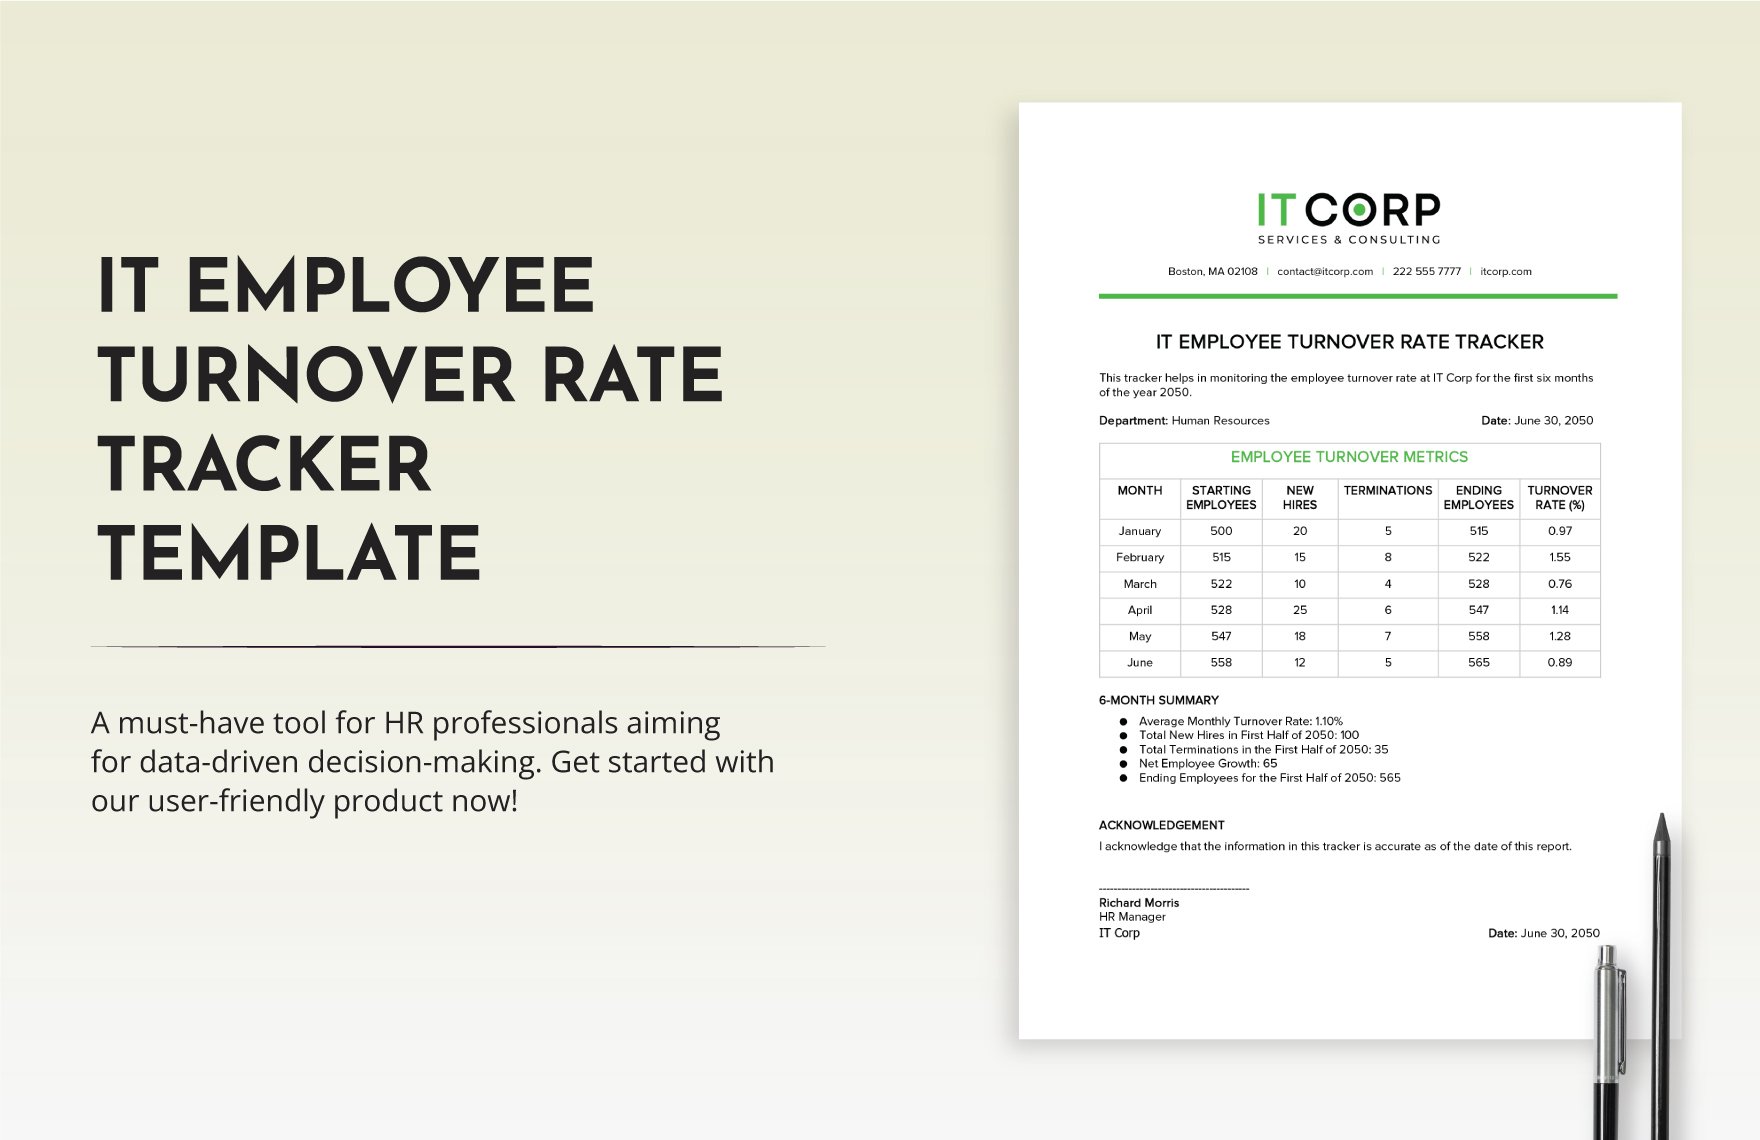 IT Employee Turnover Rate Tracker Template in Word, Google Docs, PDF